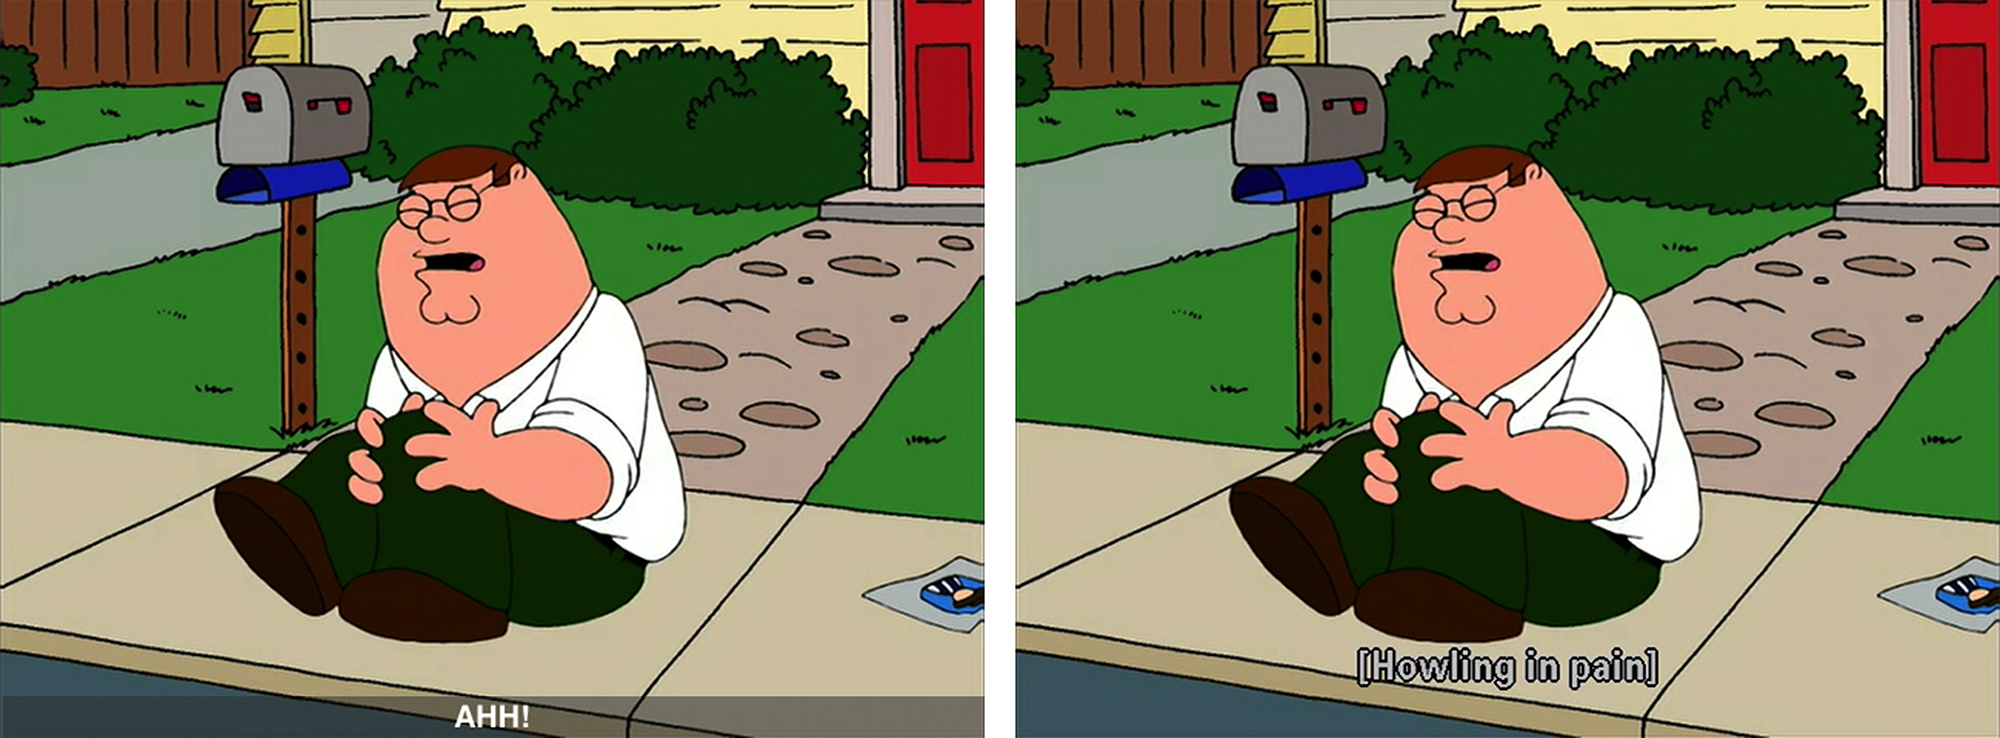 Two identical frames from an episode of Family Guy  featuring different captions: AHH! in the text caption track and [Howling in pain]  in the bitmap caption track.